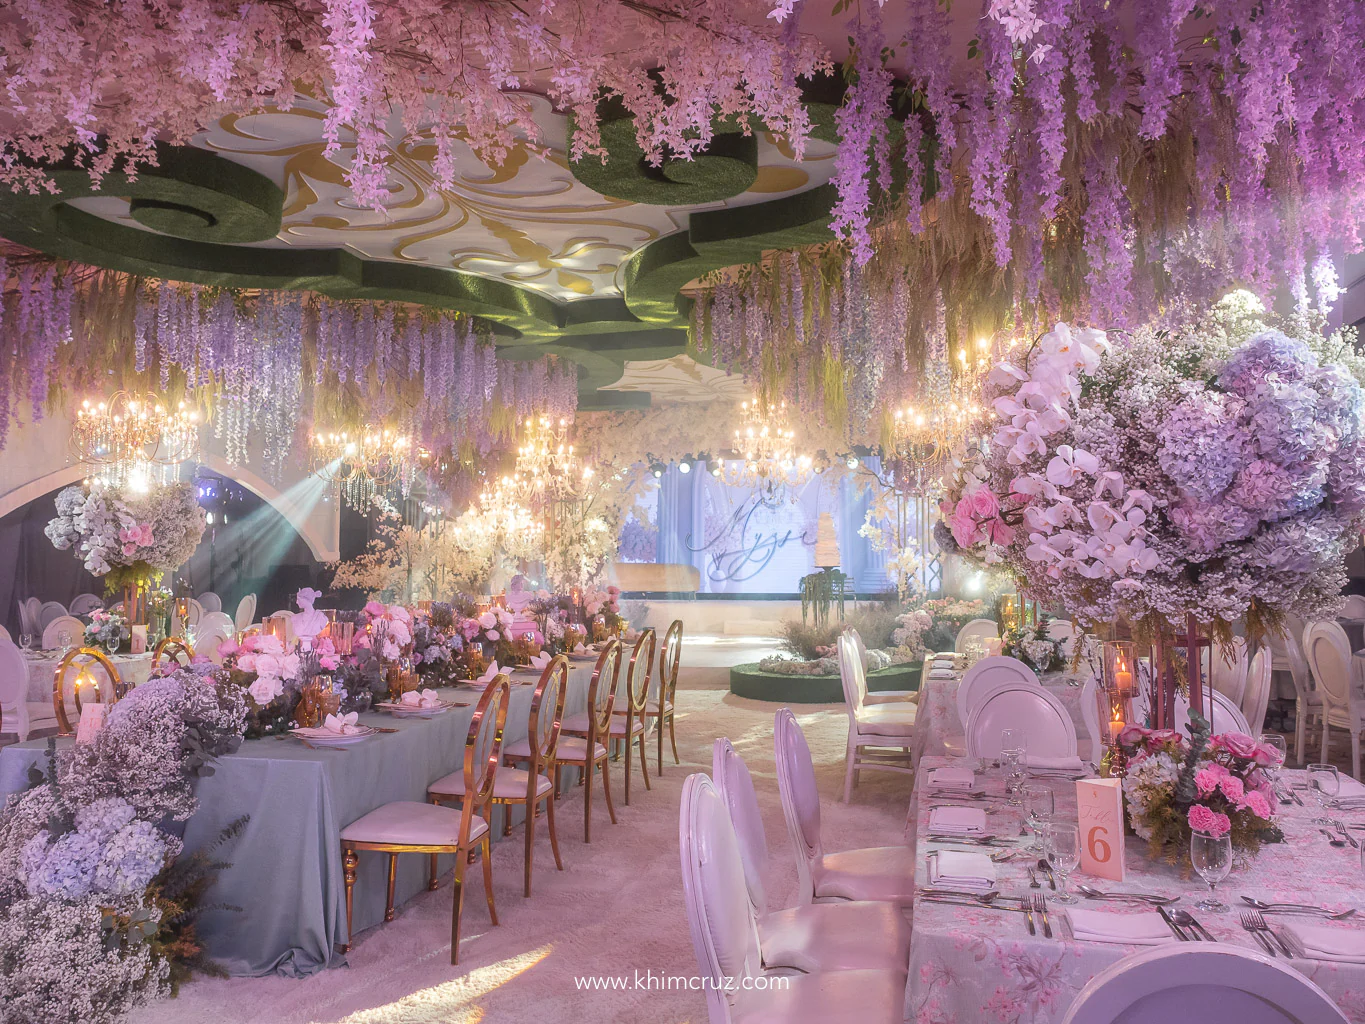 chateau gardens inspired debut 18th birthday celebration ceiling and table floral design by Khim Cruz